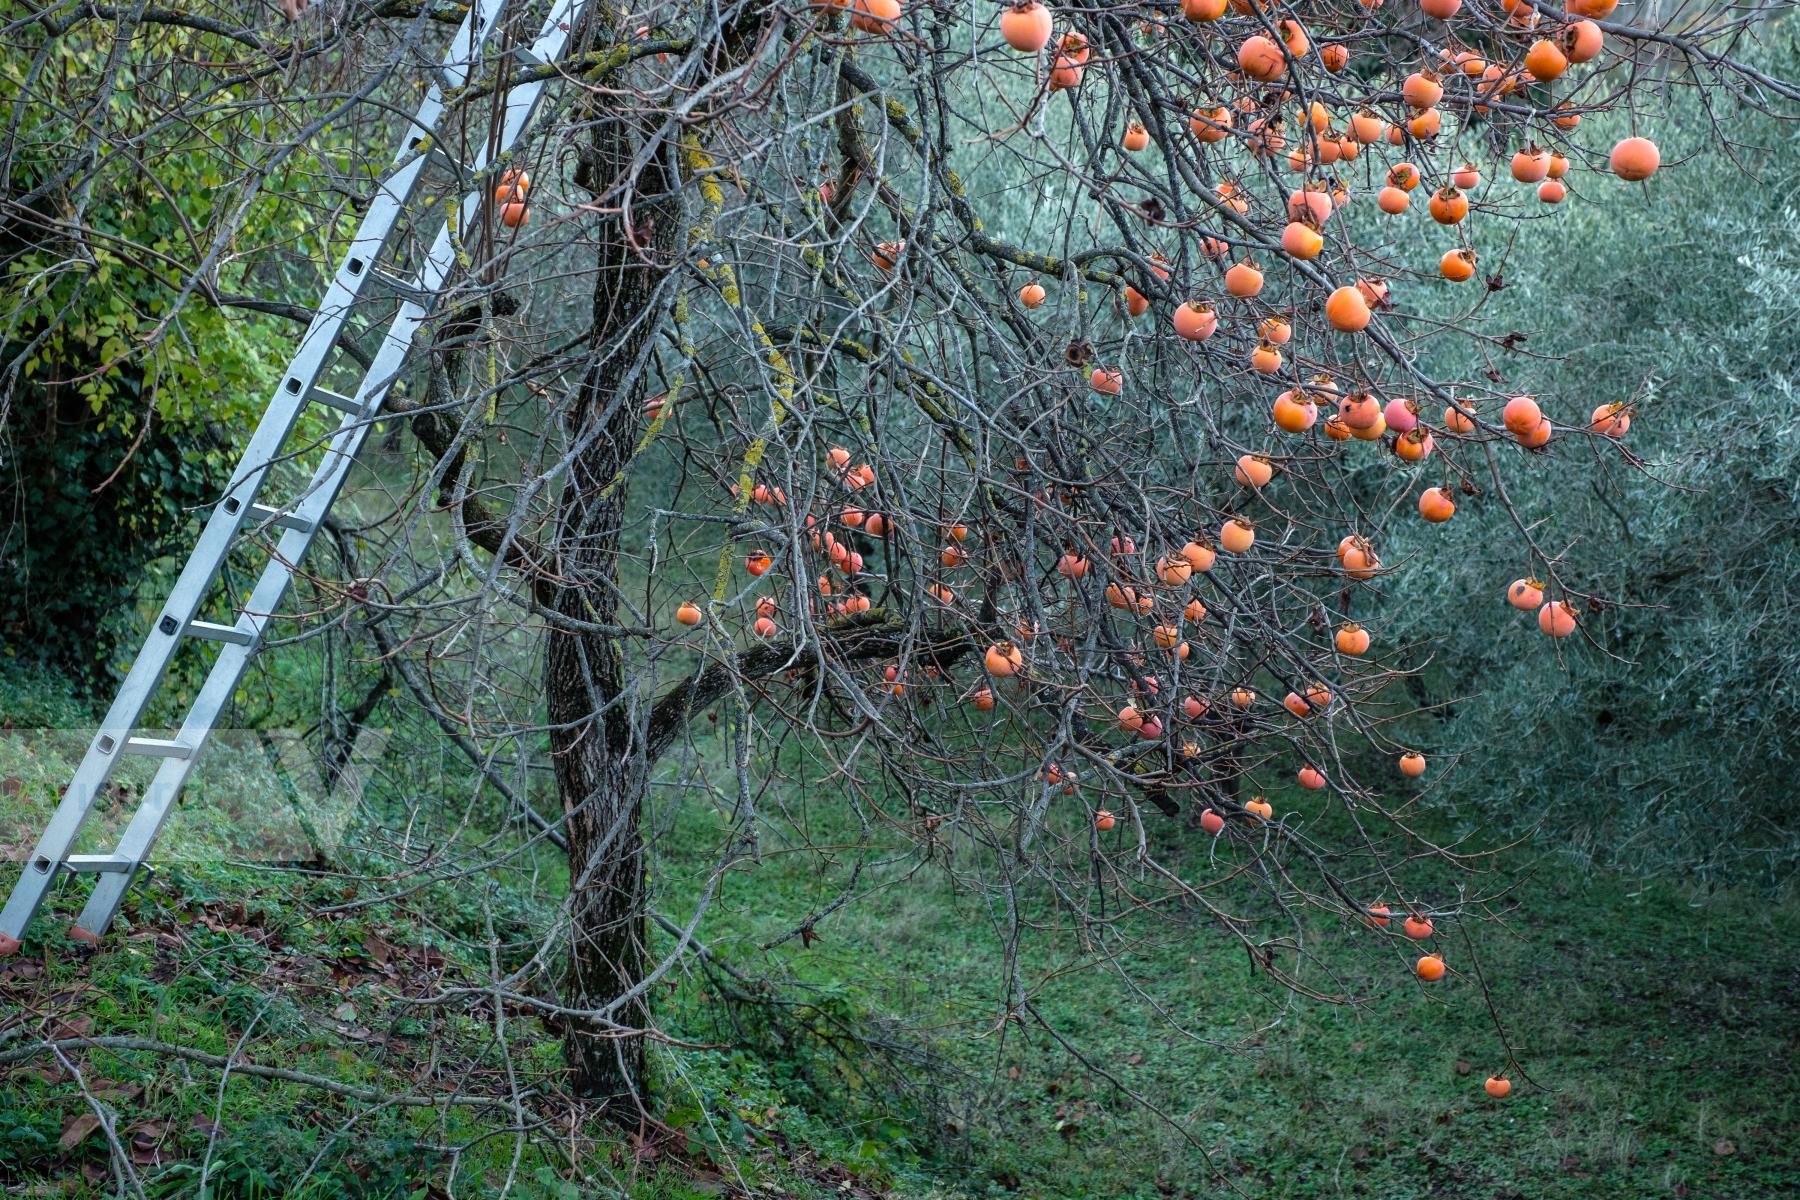 Purchase Persimmon Tree in Tuscany by Carla Cioffi